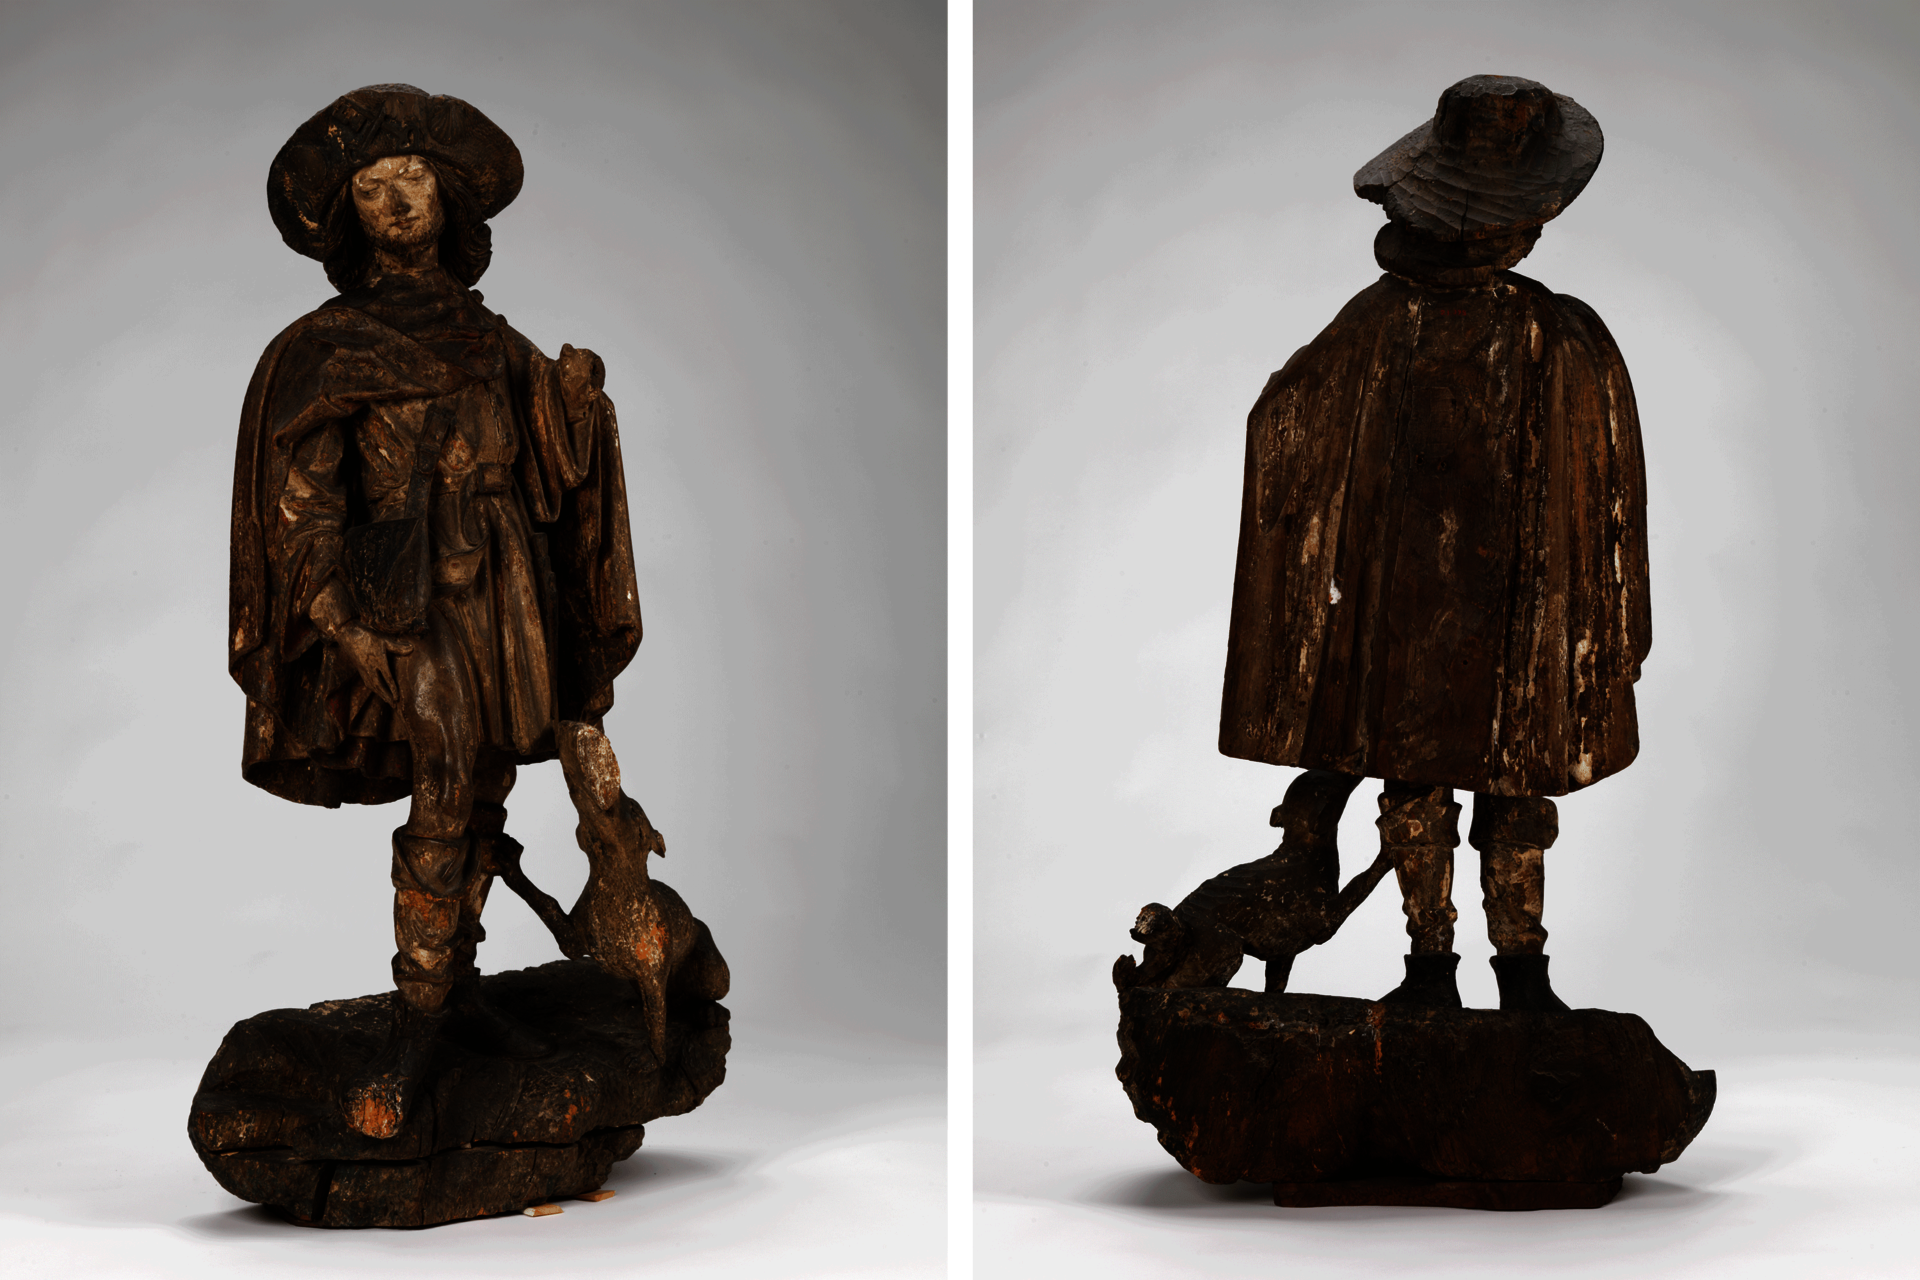 Dark-brown sculpture of a standing man wearing a cape, hat, and boots. He looks to the side, hand on his thigh. A dog at his feet looks up at him.